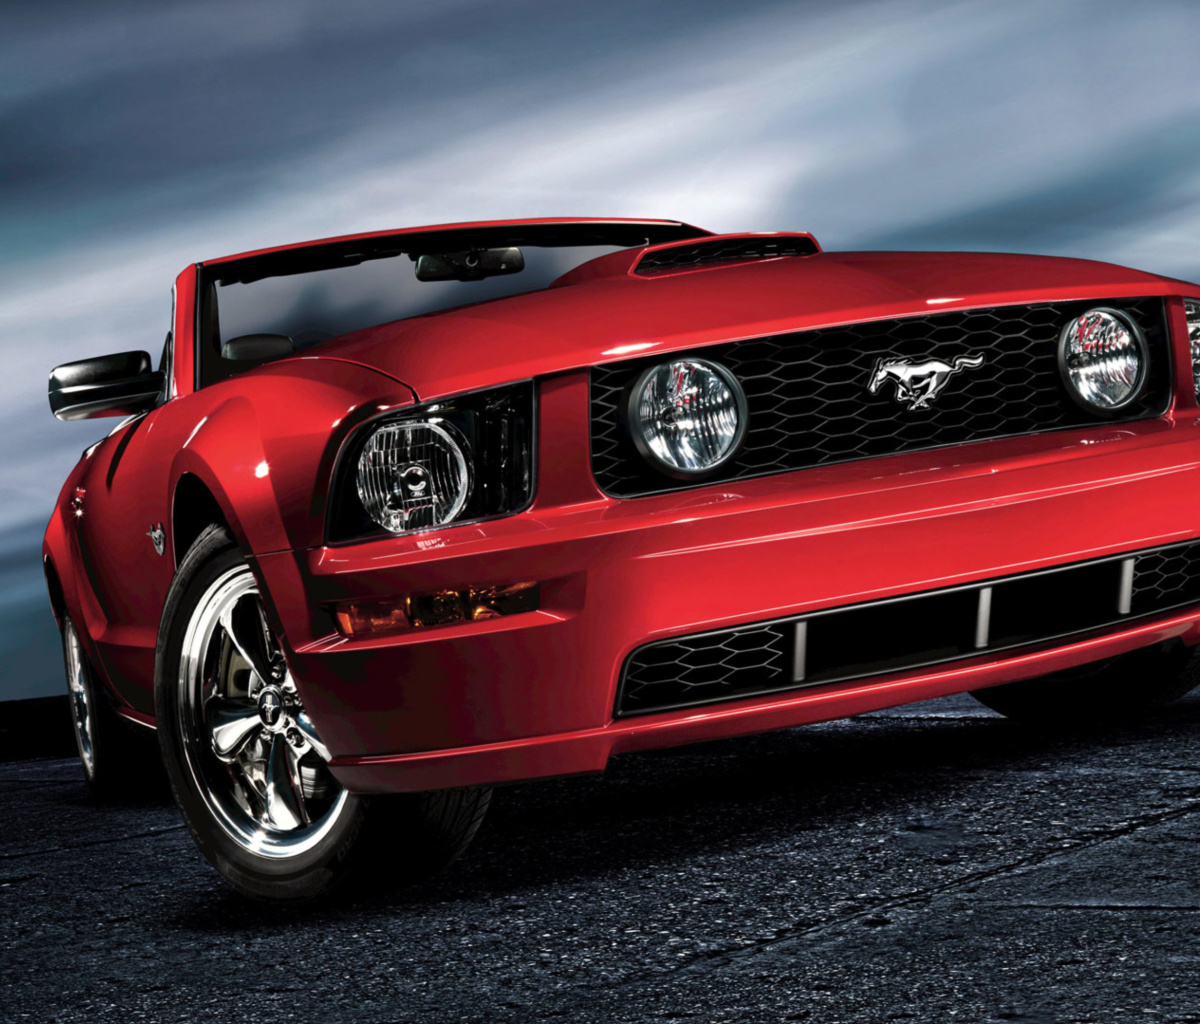 Ford Mustang Shelby GT500 wallpaper 1200x1024